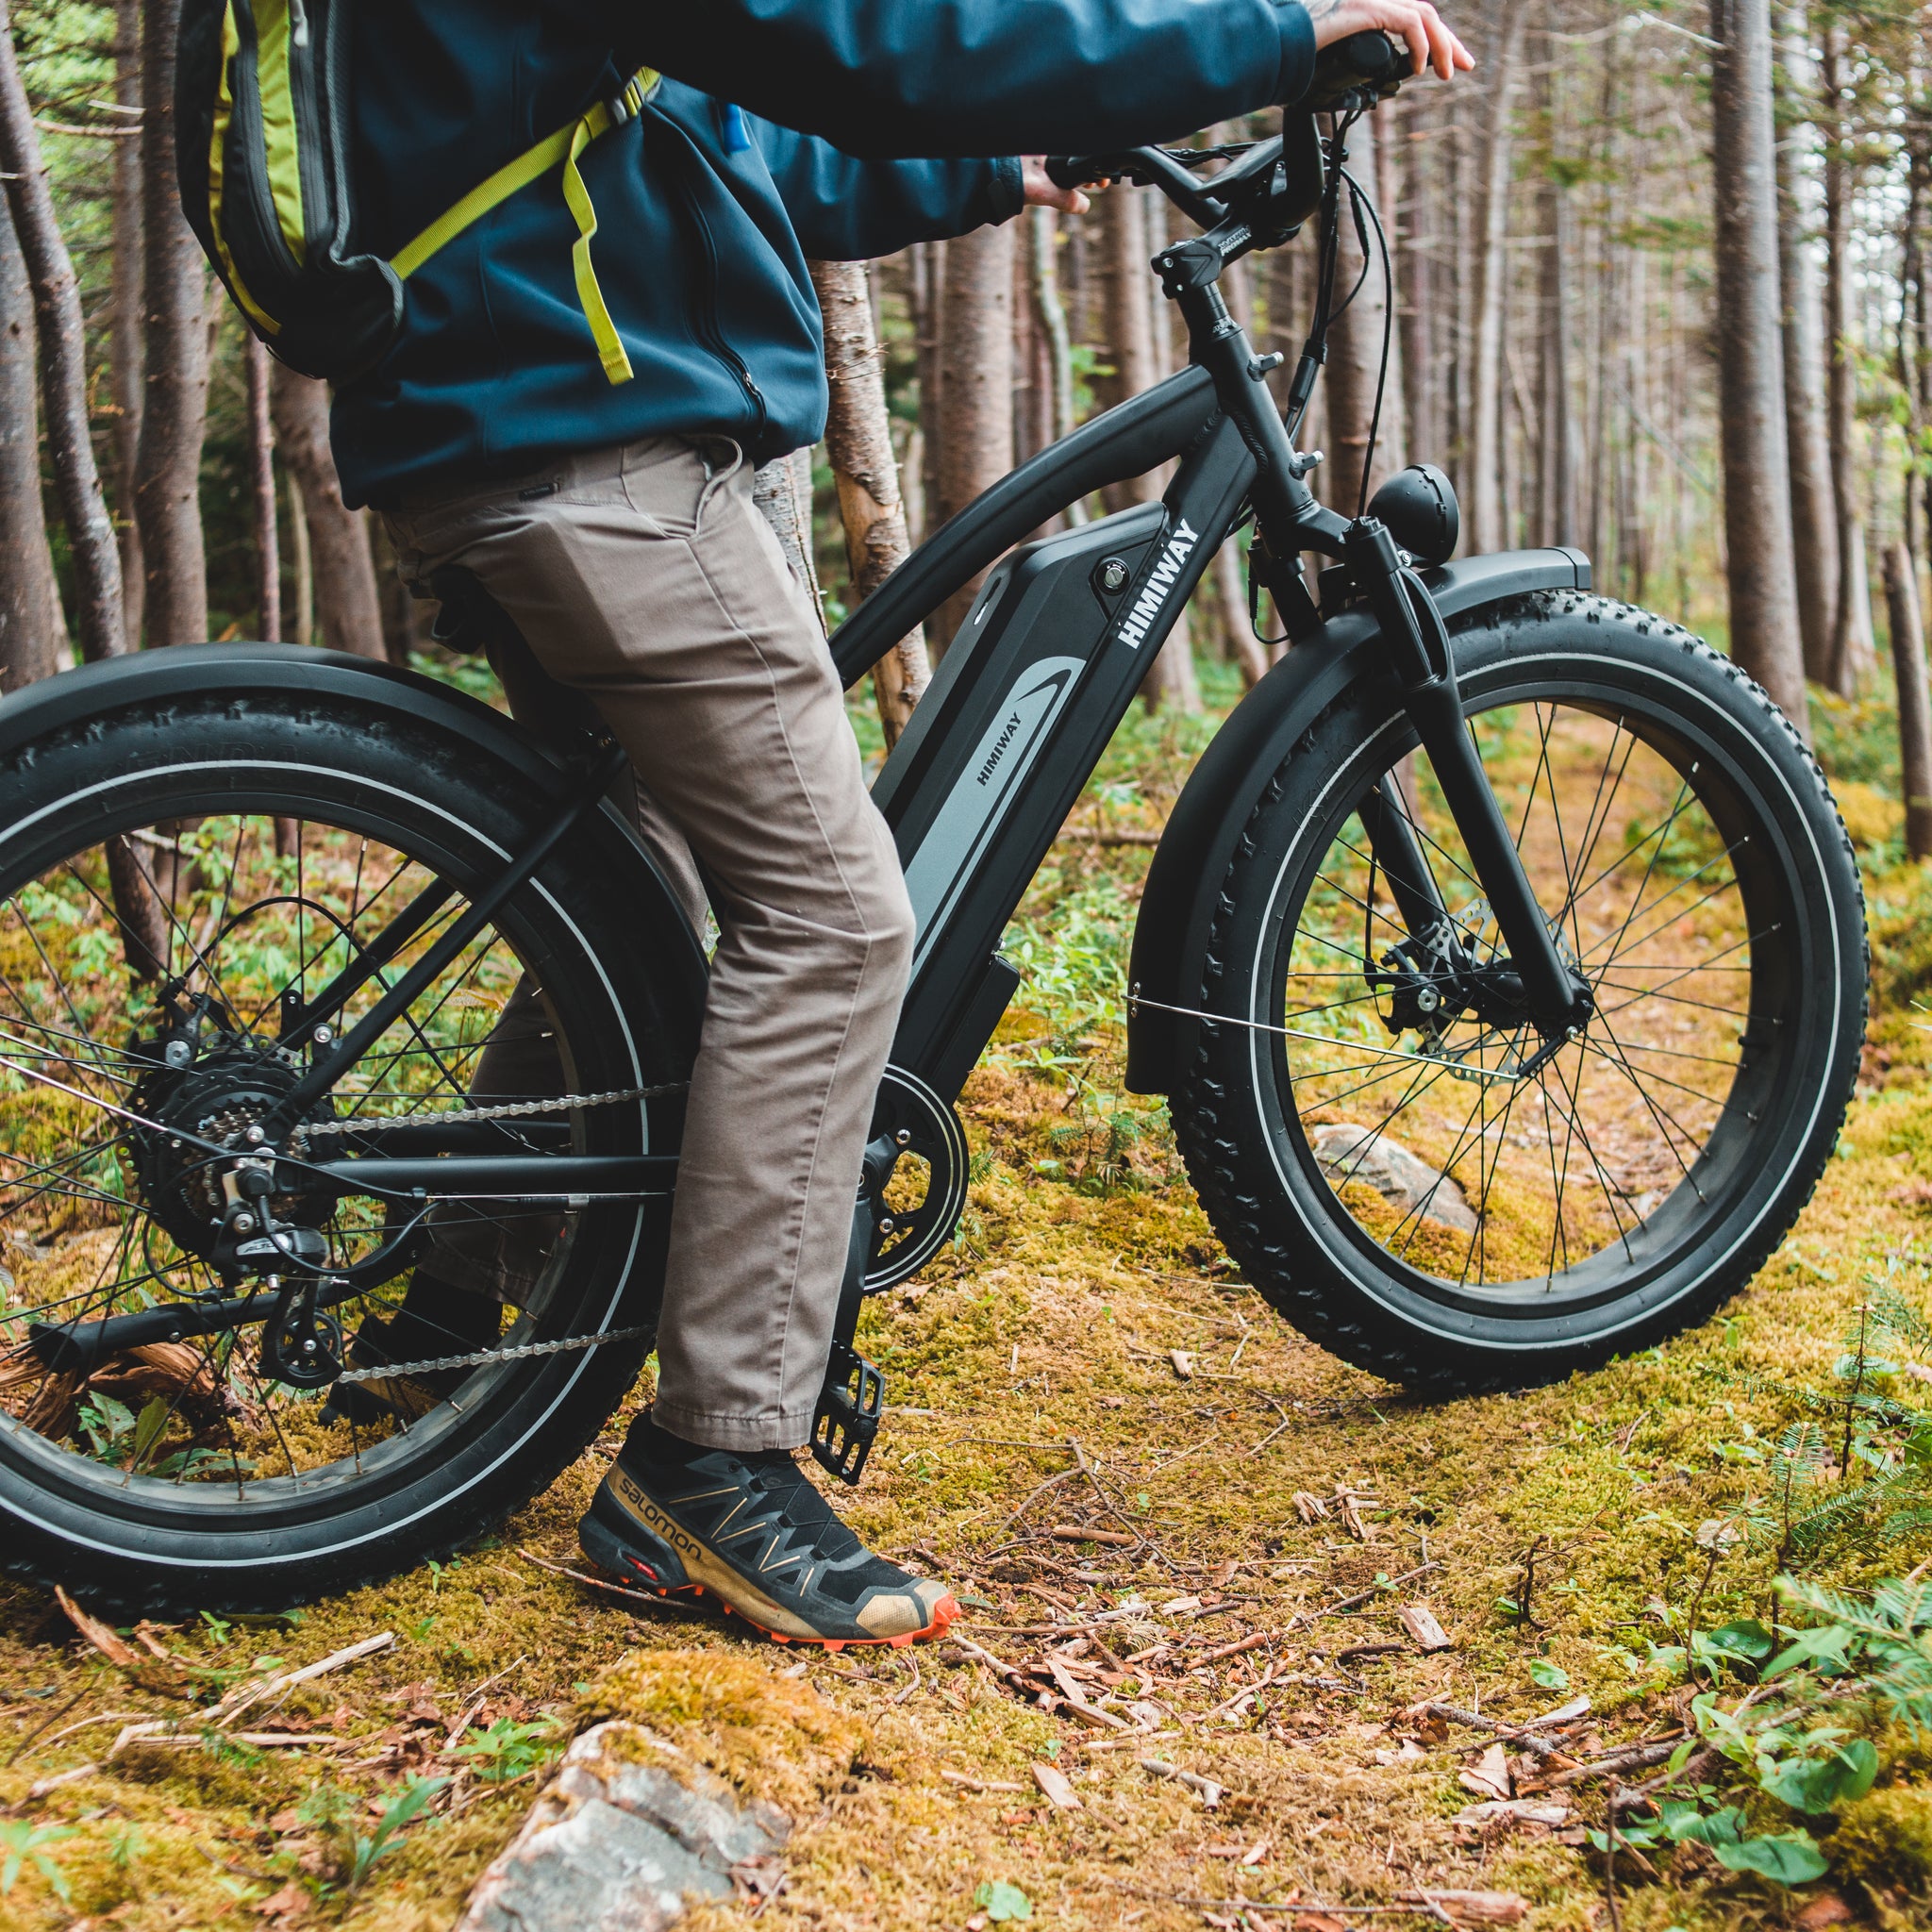 Top 5 Electric Bike Hunting Tips for 2021